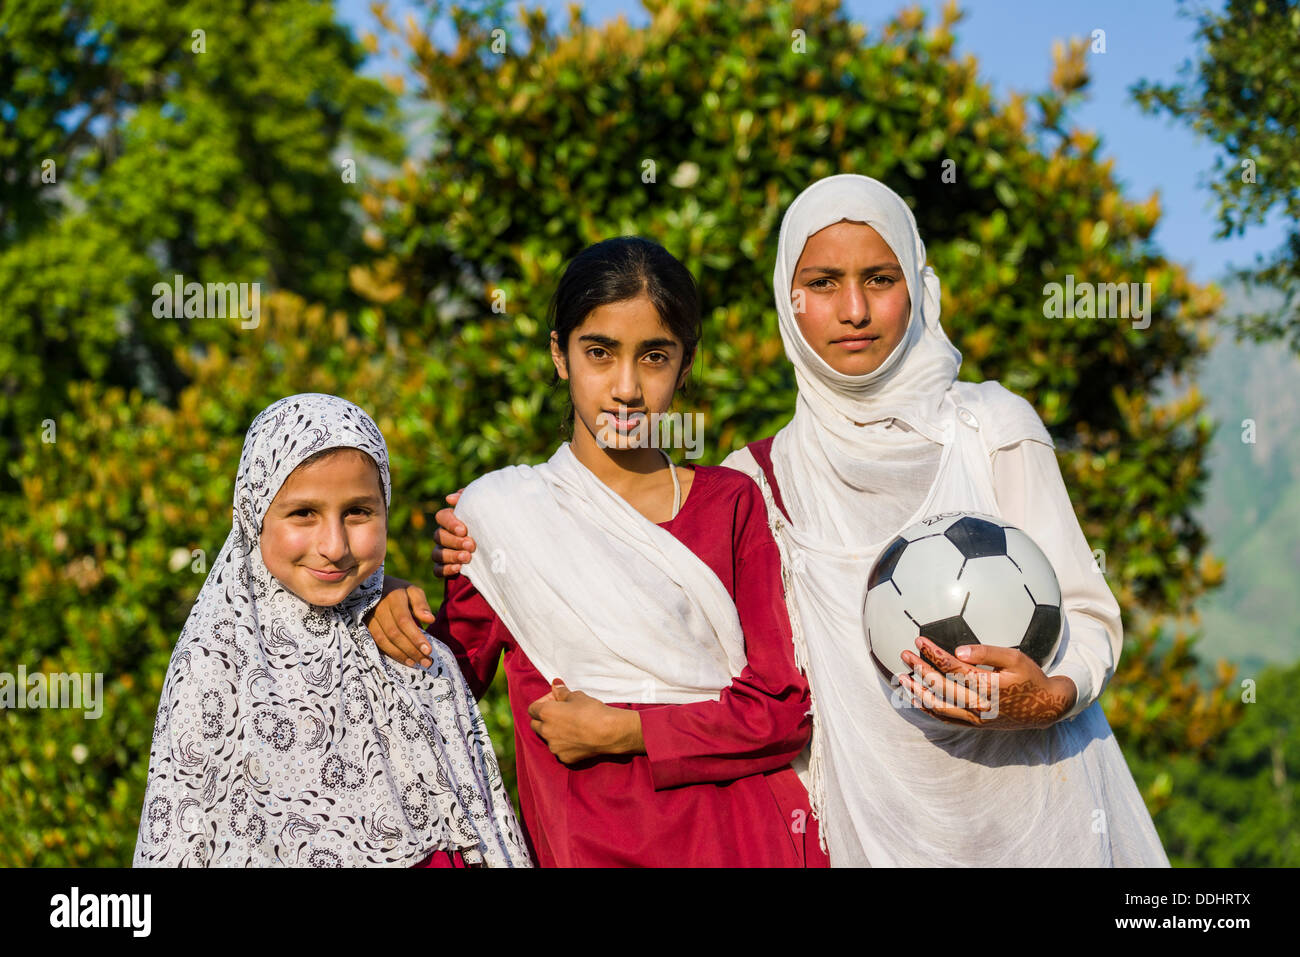 Three Kashmiri girls, one holding a soccer ball, two wearing headscarves Stock Photo